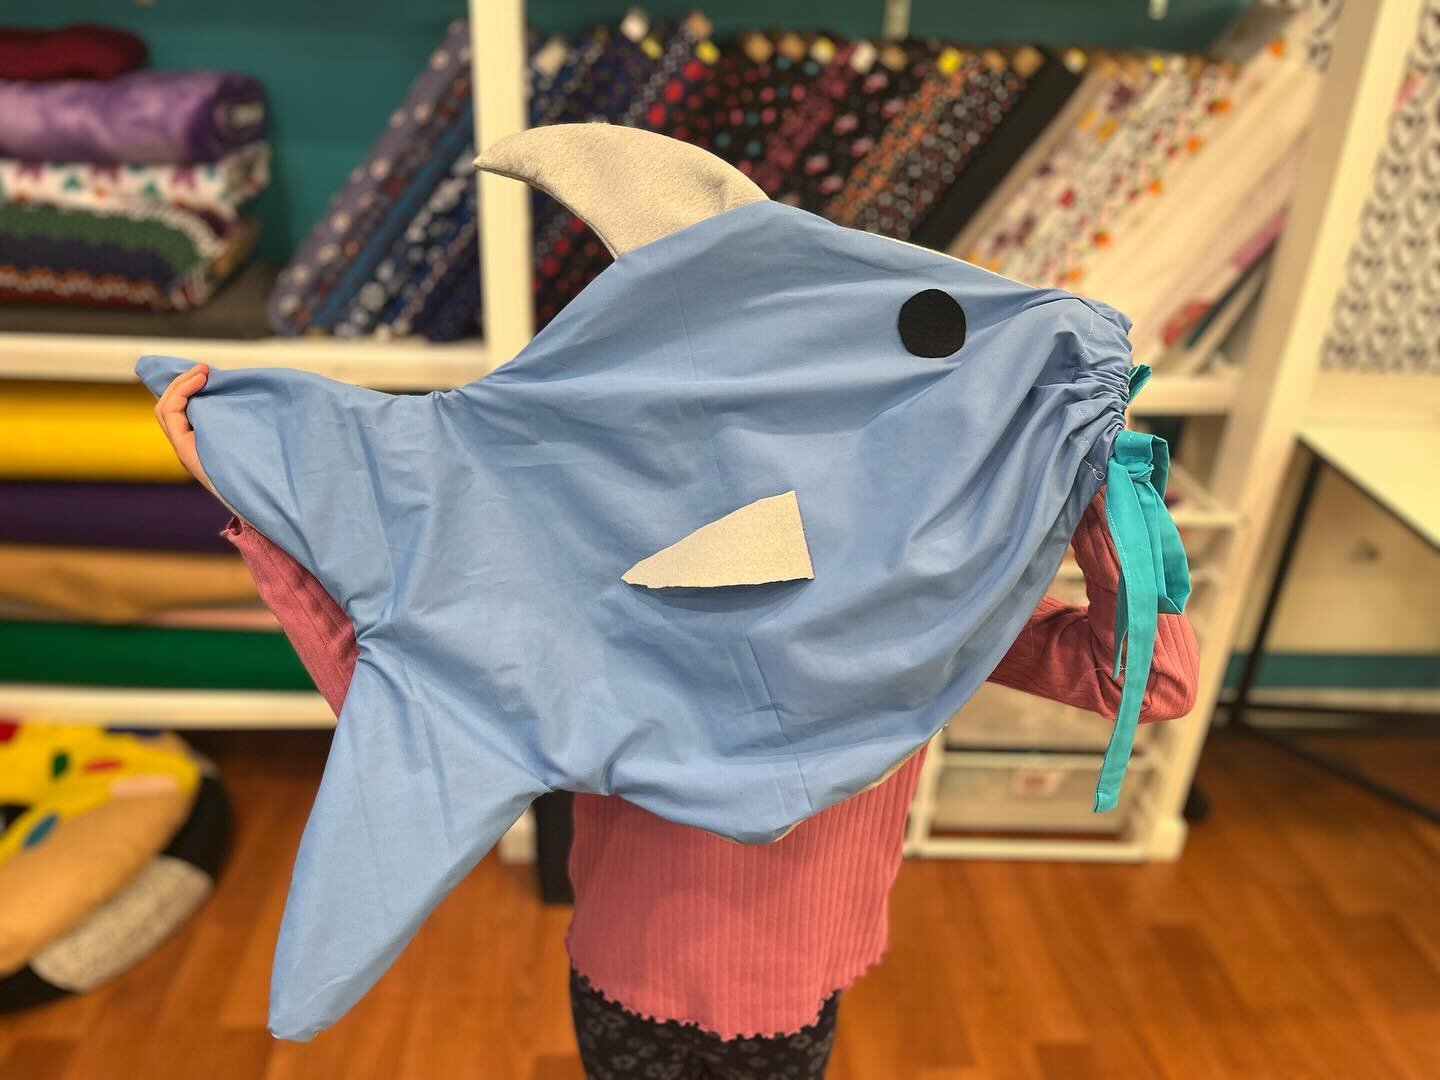 Love to see our students get creative! 🦈 s#sewing #sewingstudio #kidswhosew #sewingtutorial